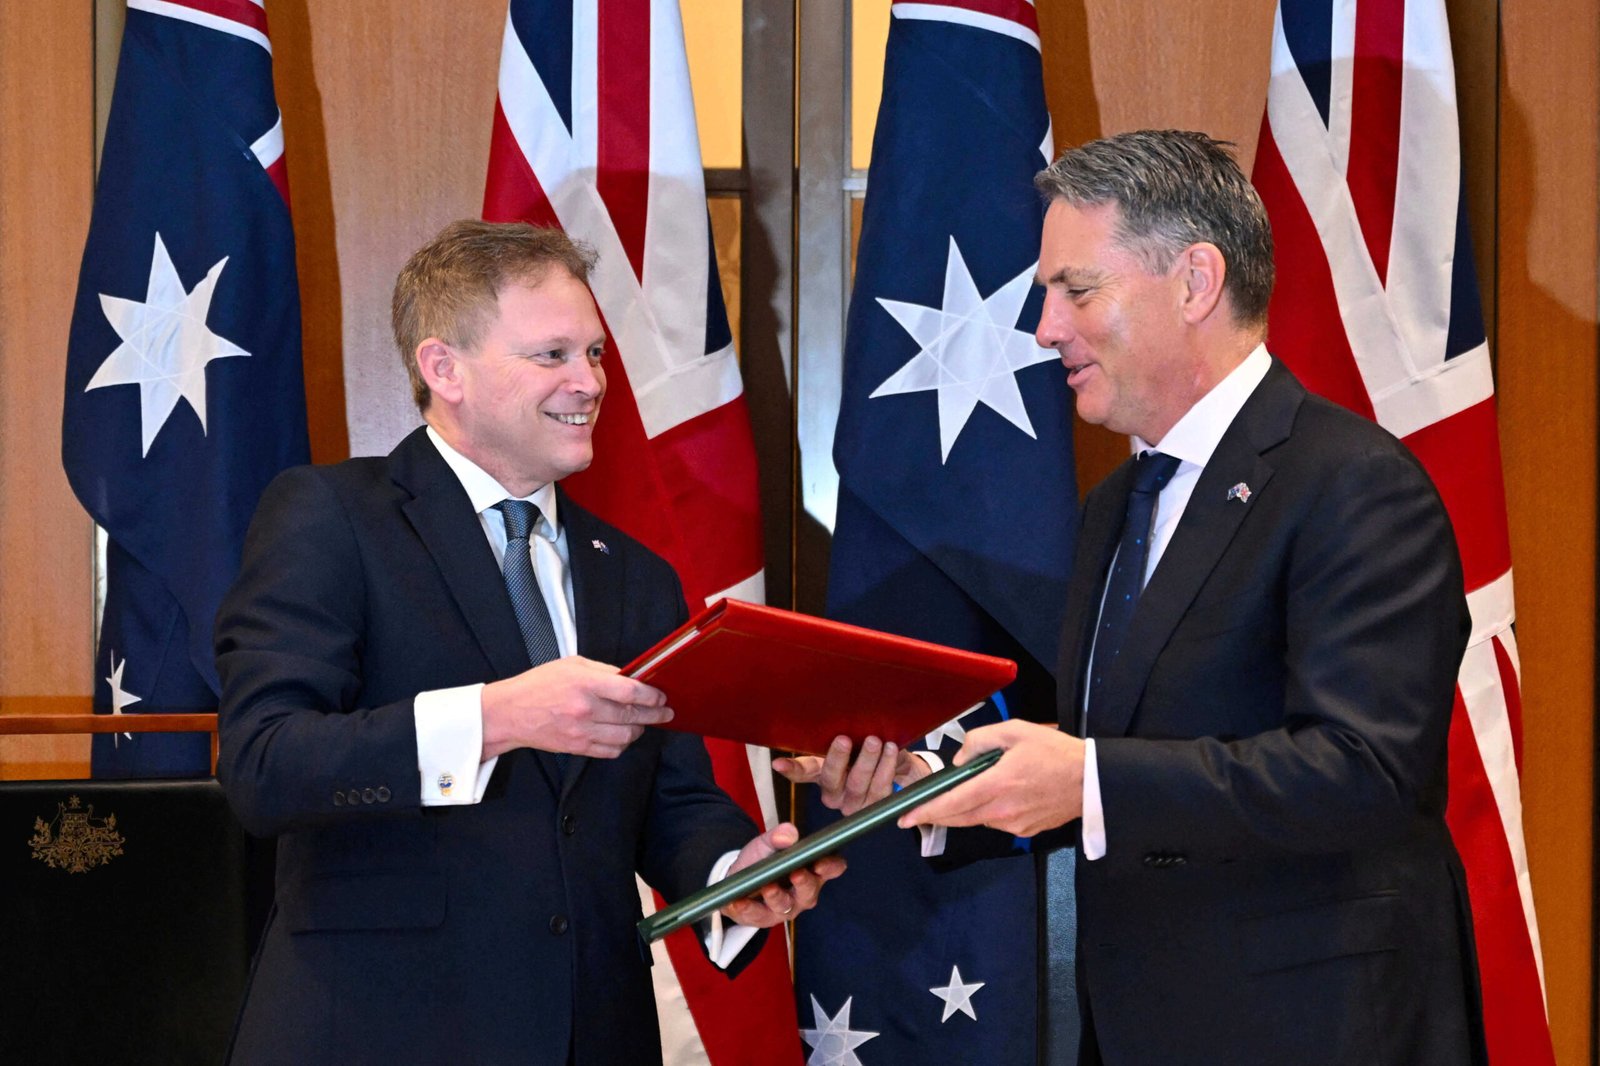 The UK & Australia, on March 21, signed a new defense treaty to boost both countries' defense ties in the face of rising Chinese power